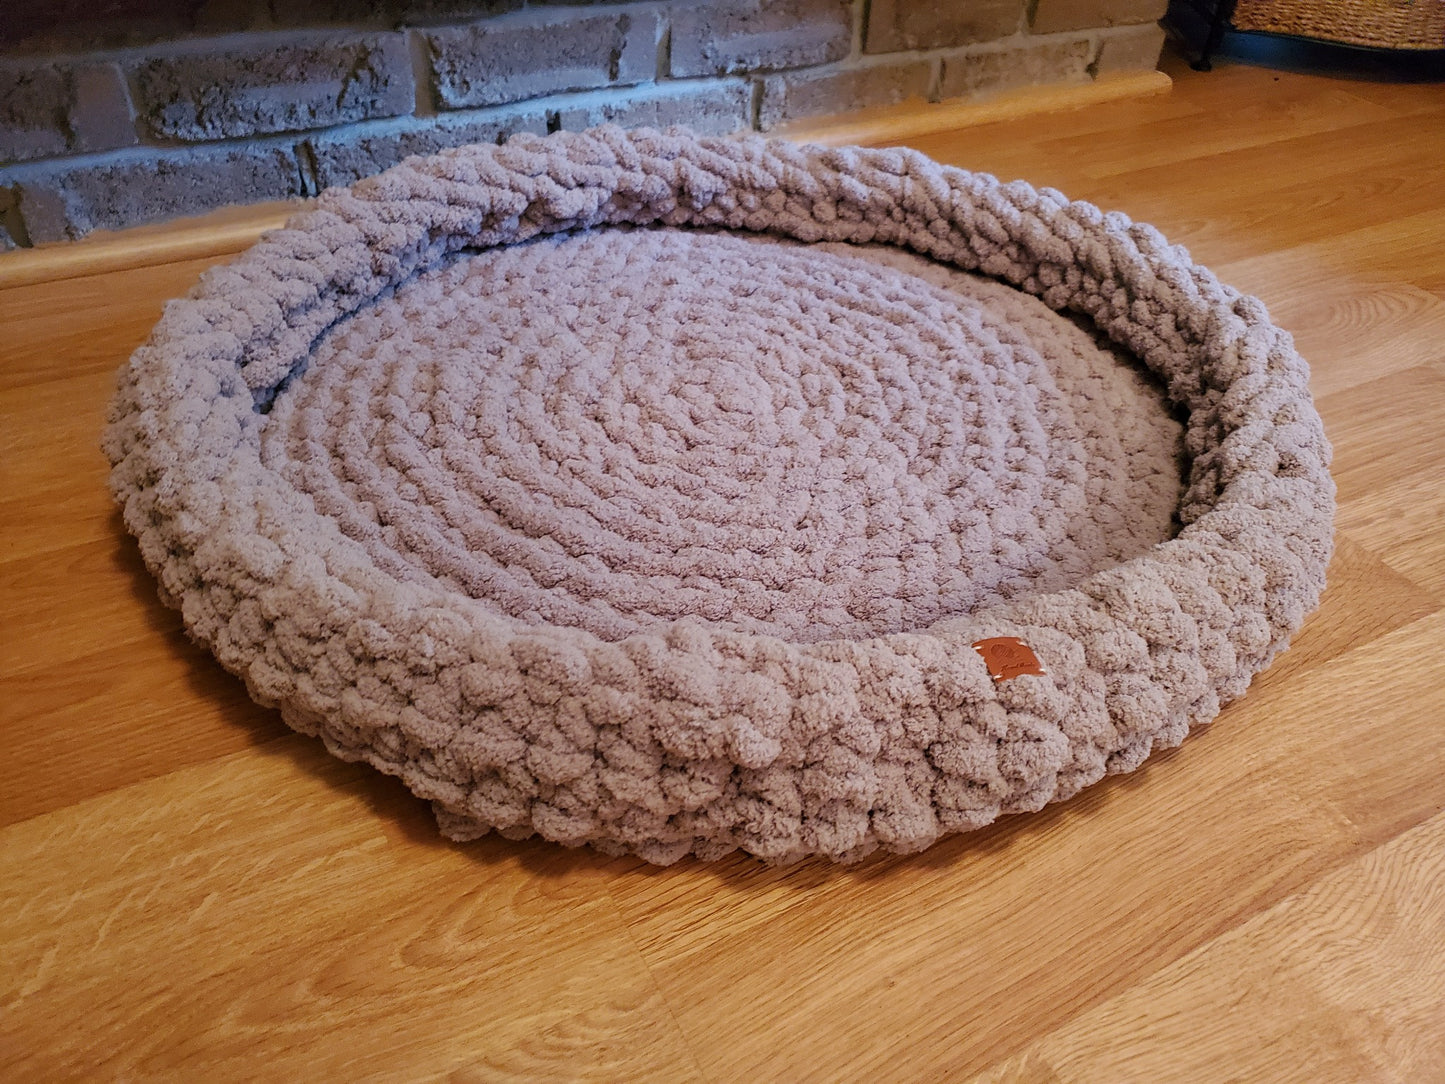 Chenille dog bed